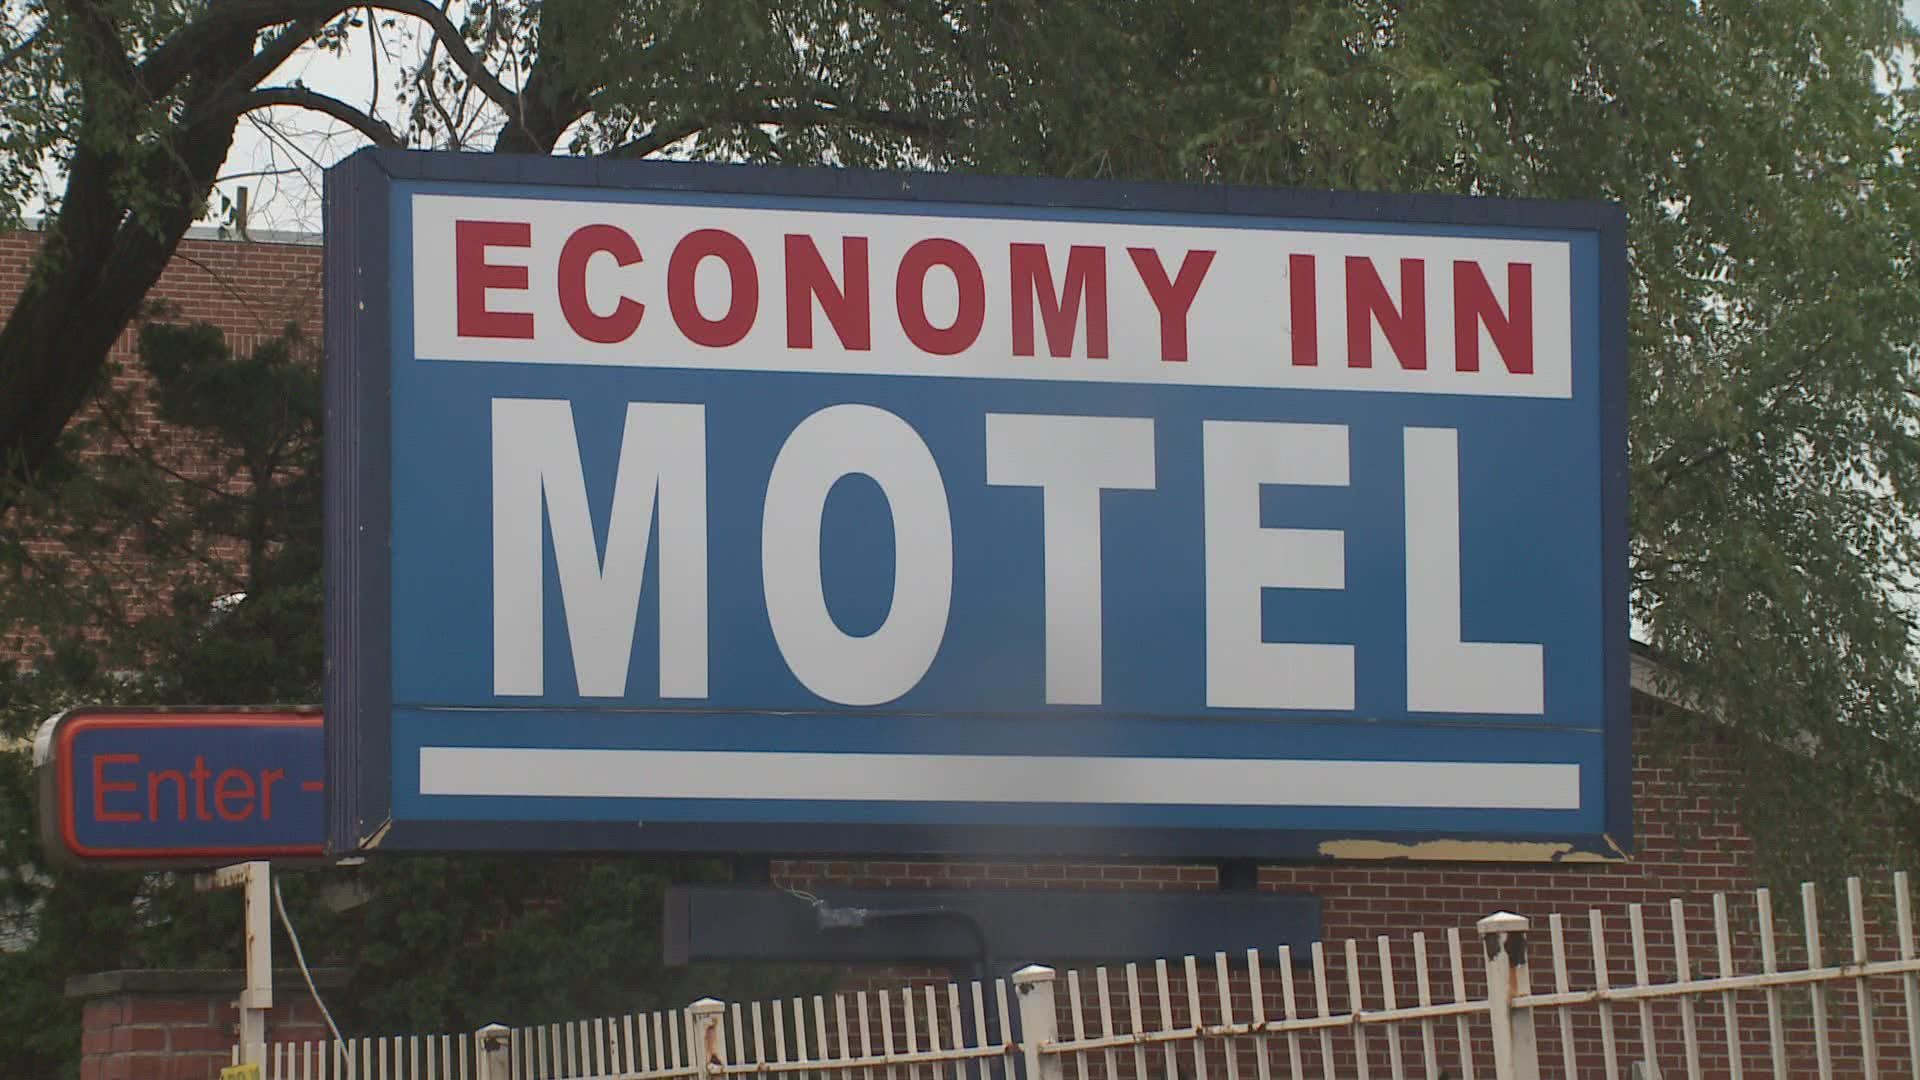 The shooting happened at about 3:45 p.m. Friday at the Economy Inn on North Grand Boulevard.